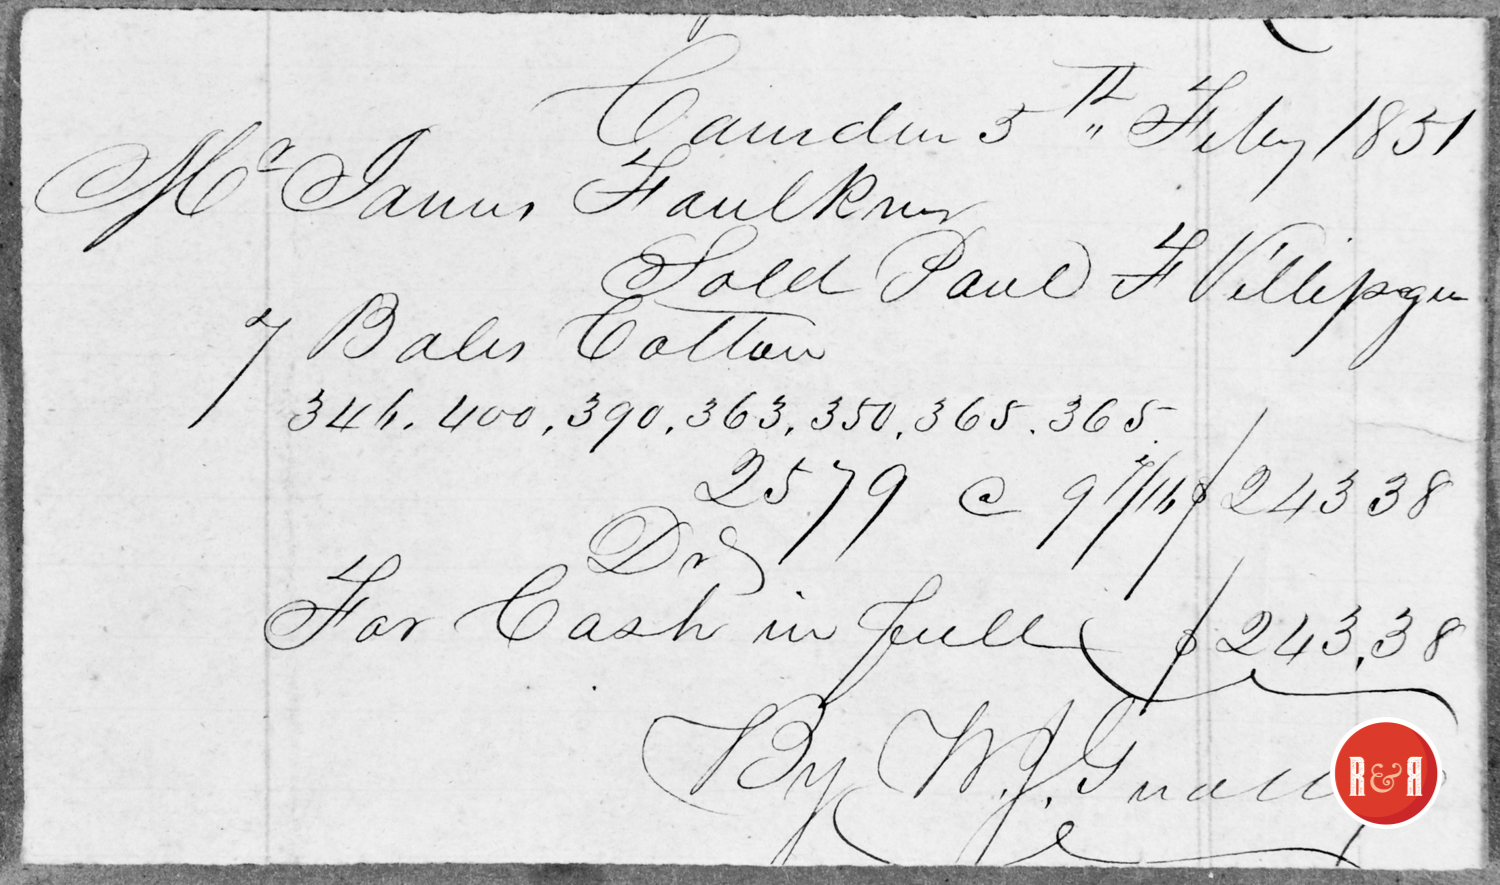 RECEIPT FOR COTTON PURCHASES FROM PAUL F. VILLIPEQUE - 1851